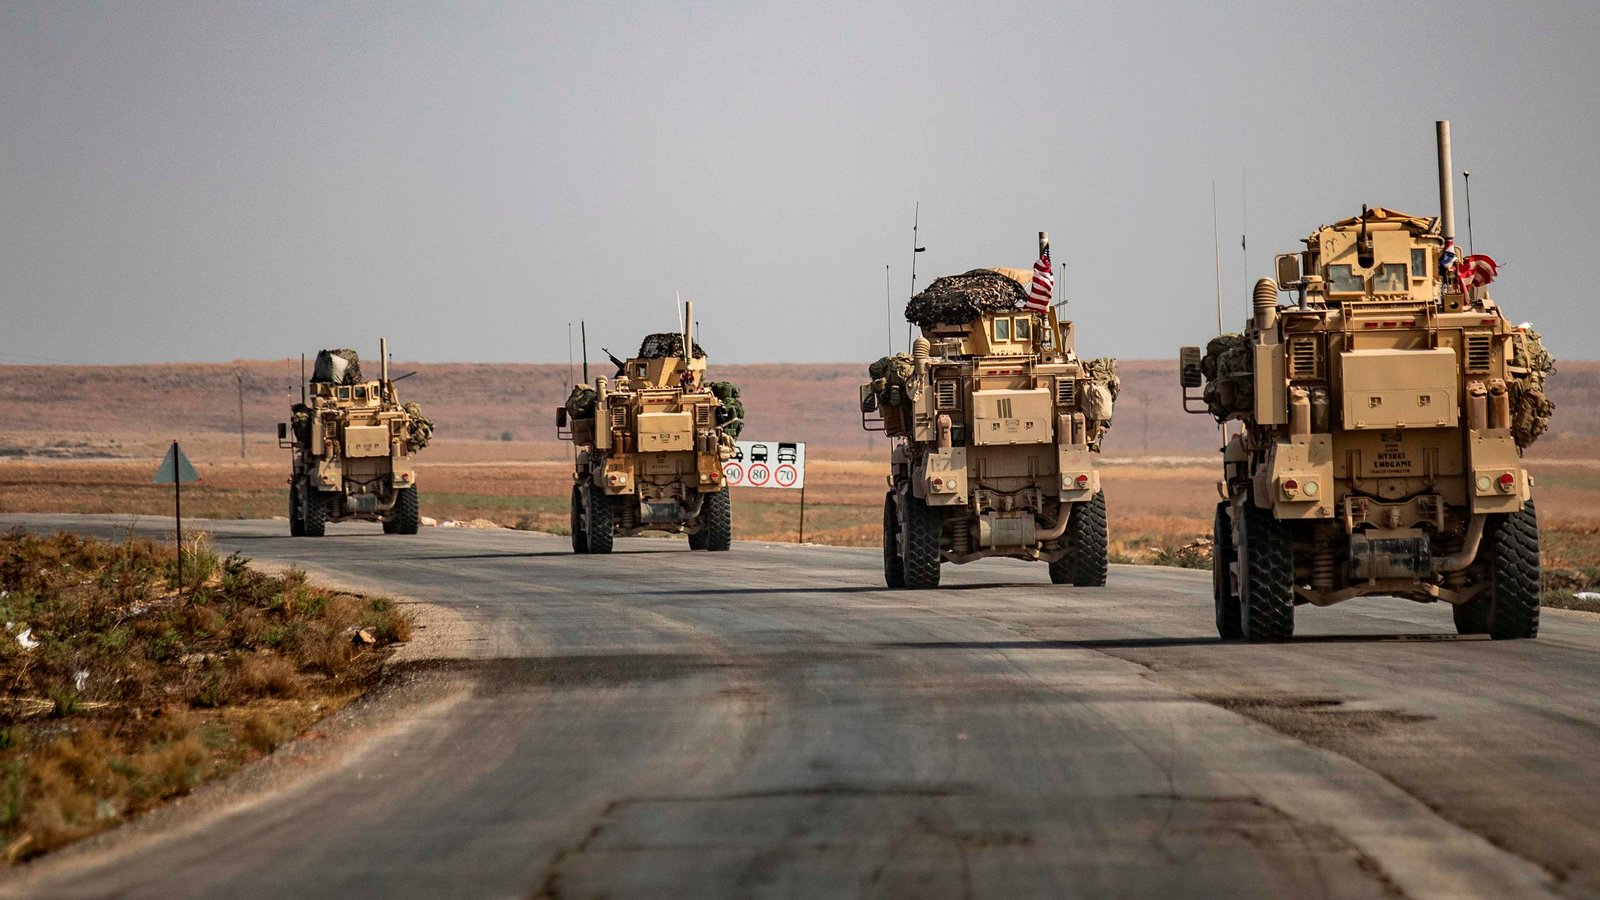 Turkey is a logistical center for ISIS – US report